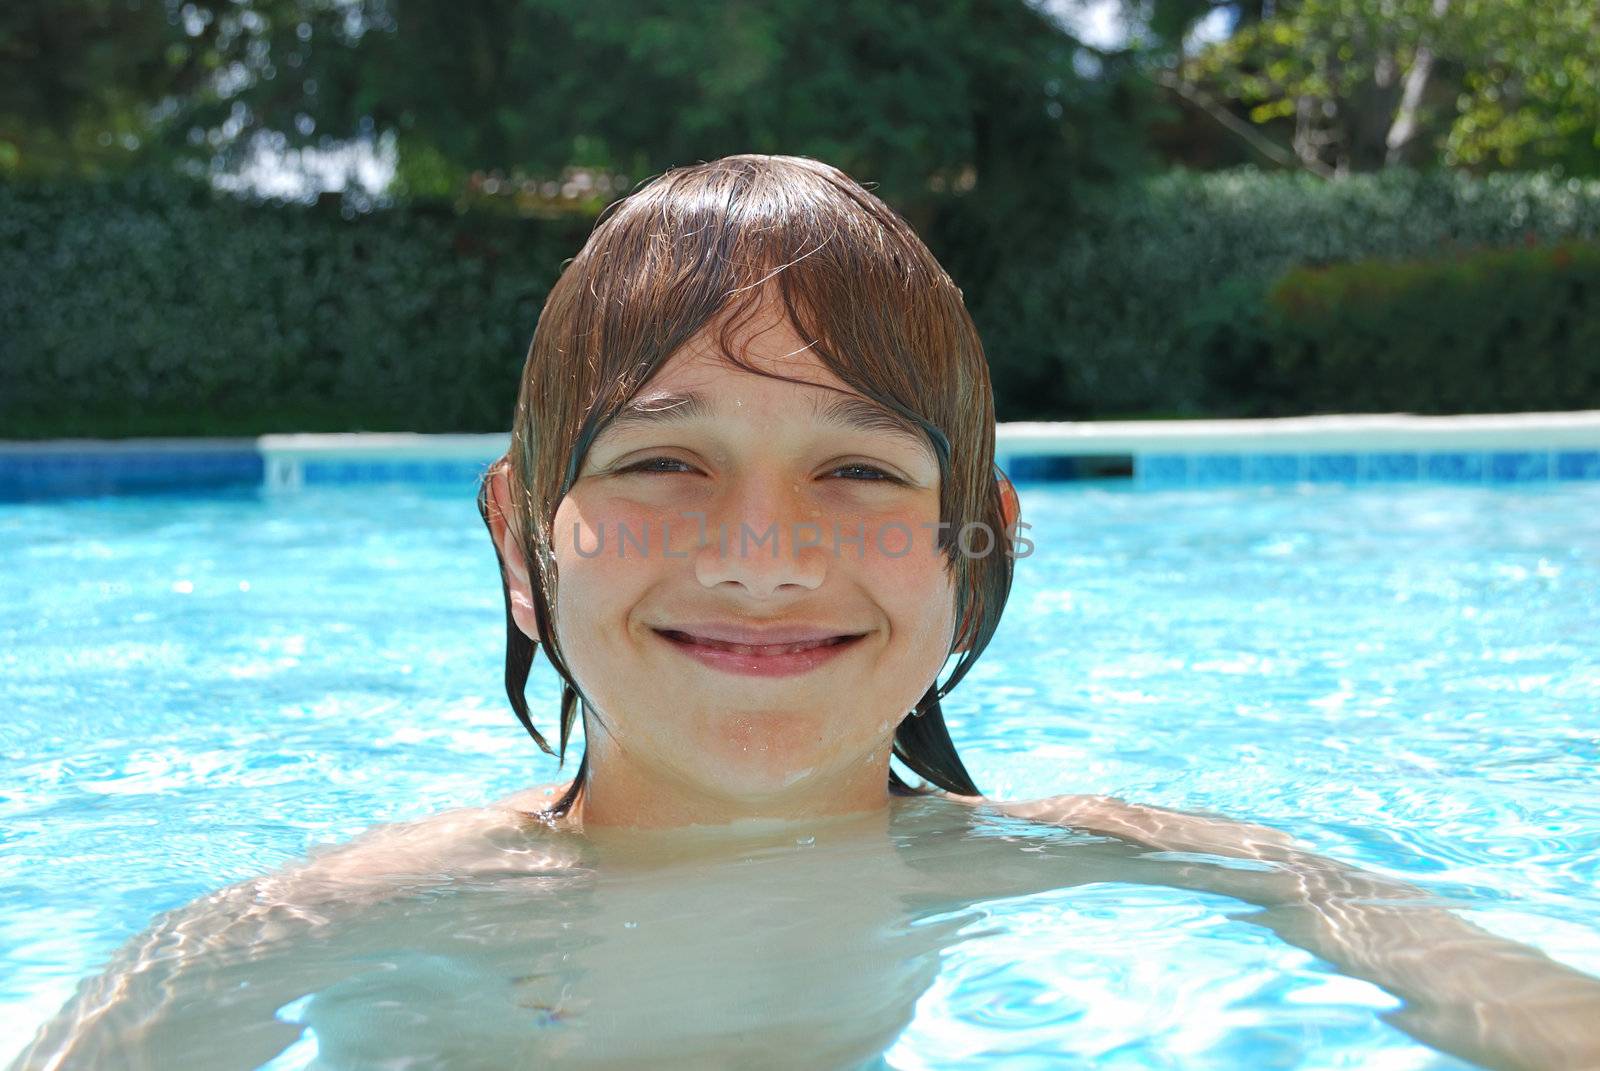 Smiling teenage boy swimming in the pool surrounded with white flower bushes in the background.